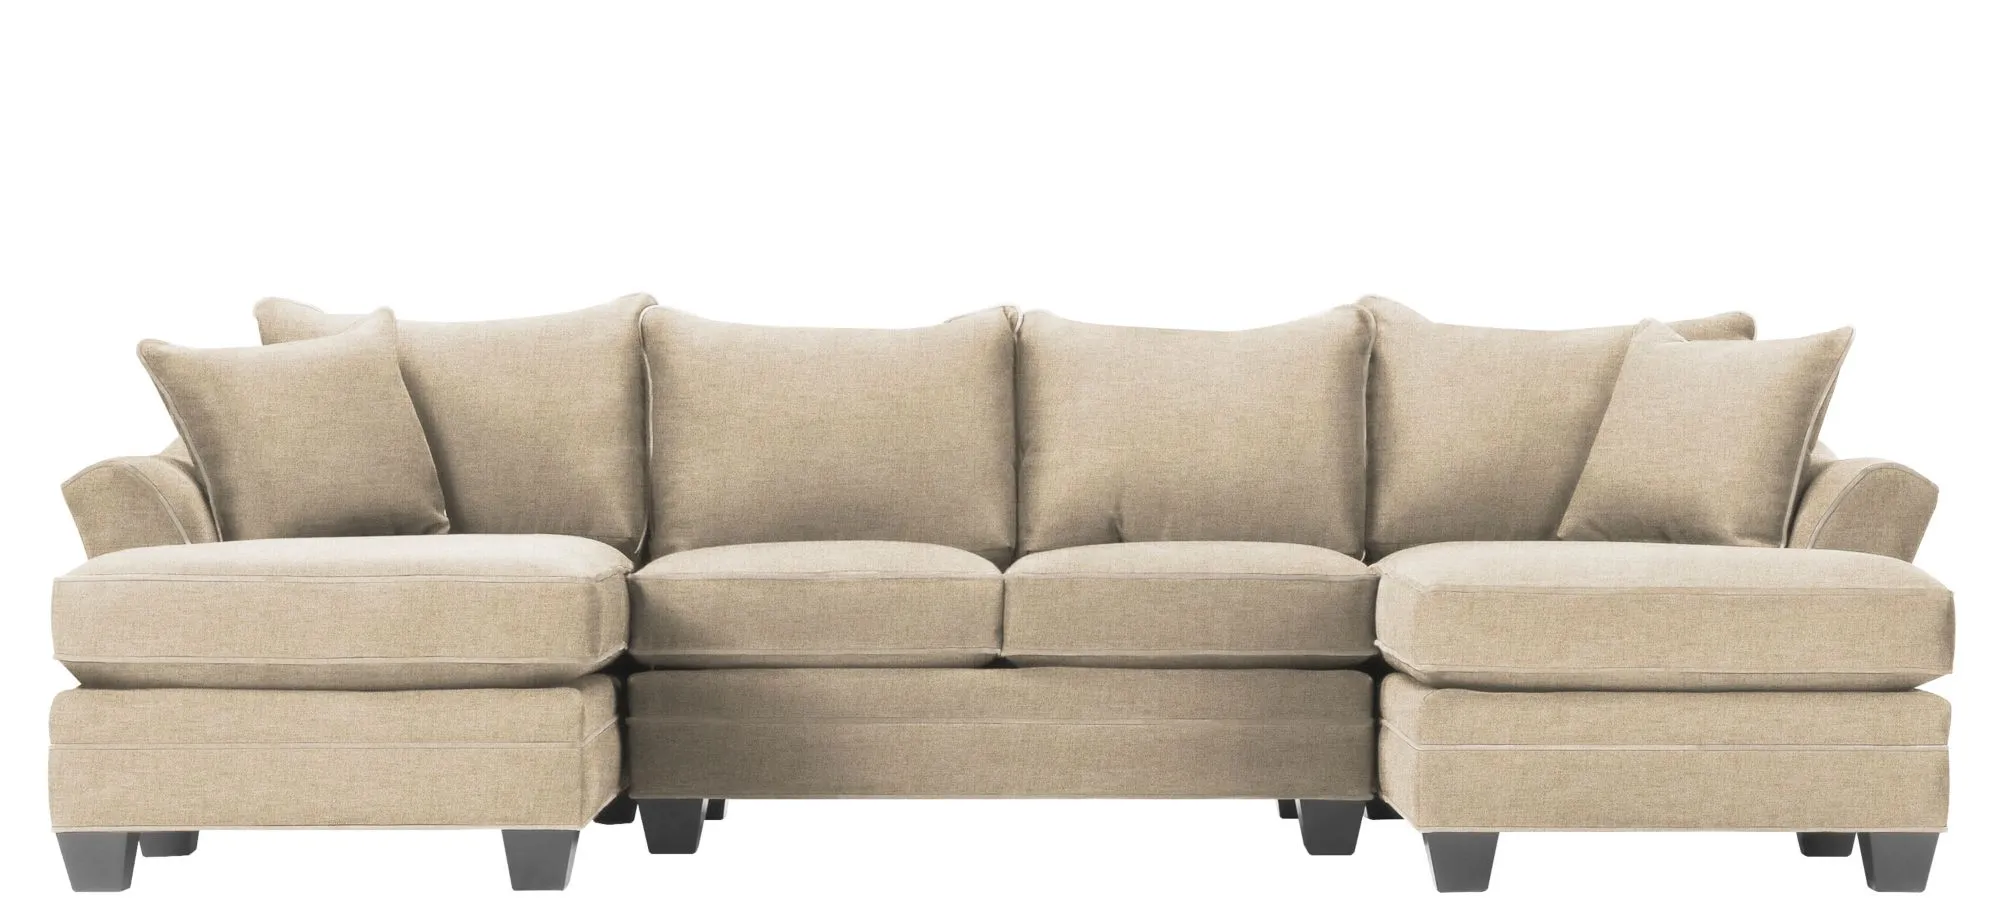 Foresthill 3-pc. Symmetrical Chaise Sectional Sofa in Santa Rosa Linen by H.M. Richards